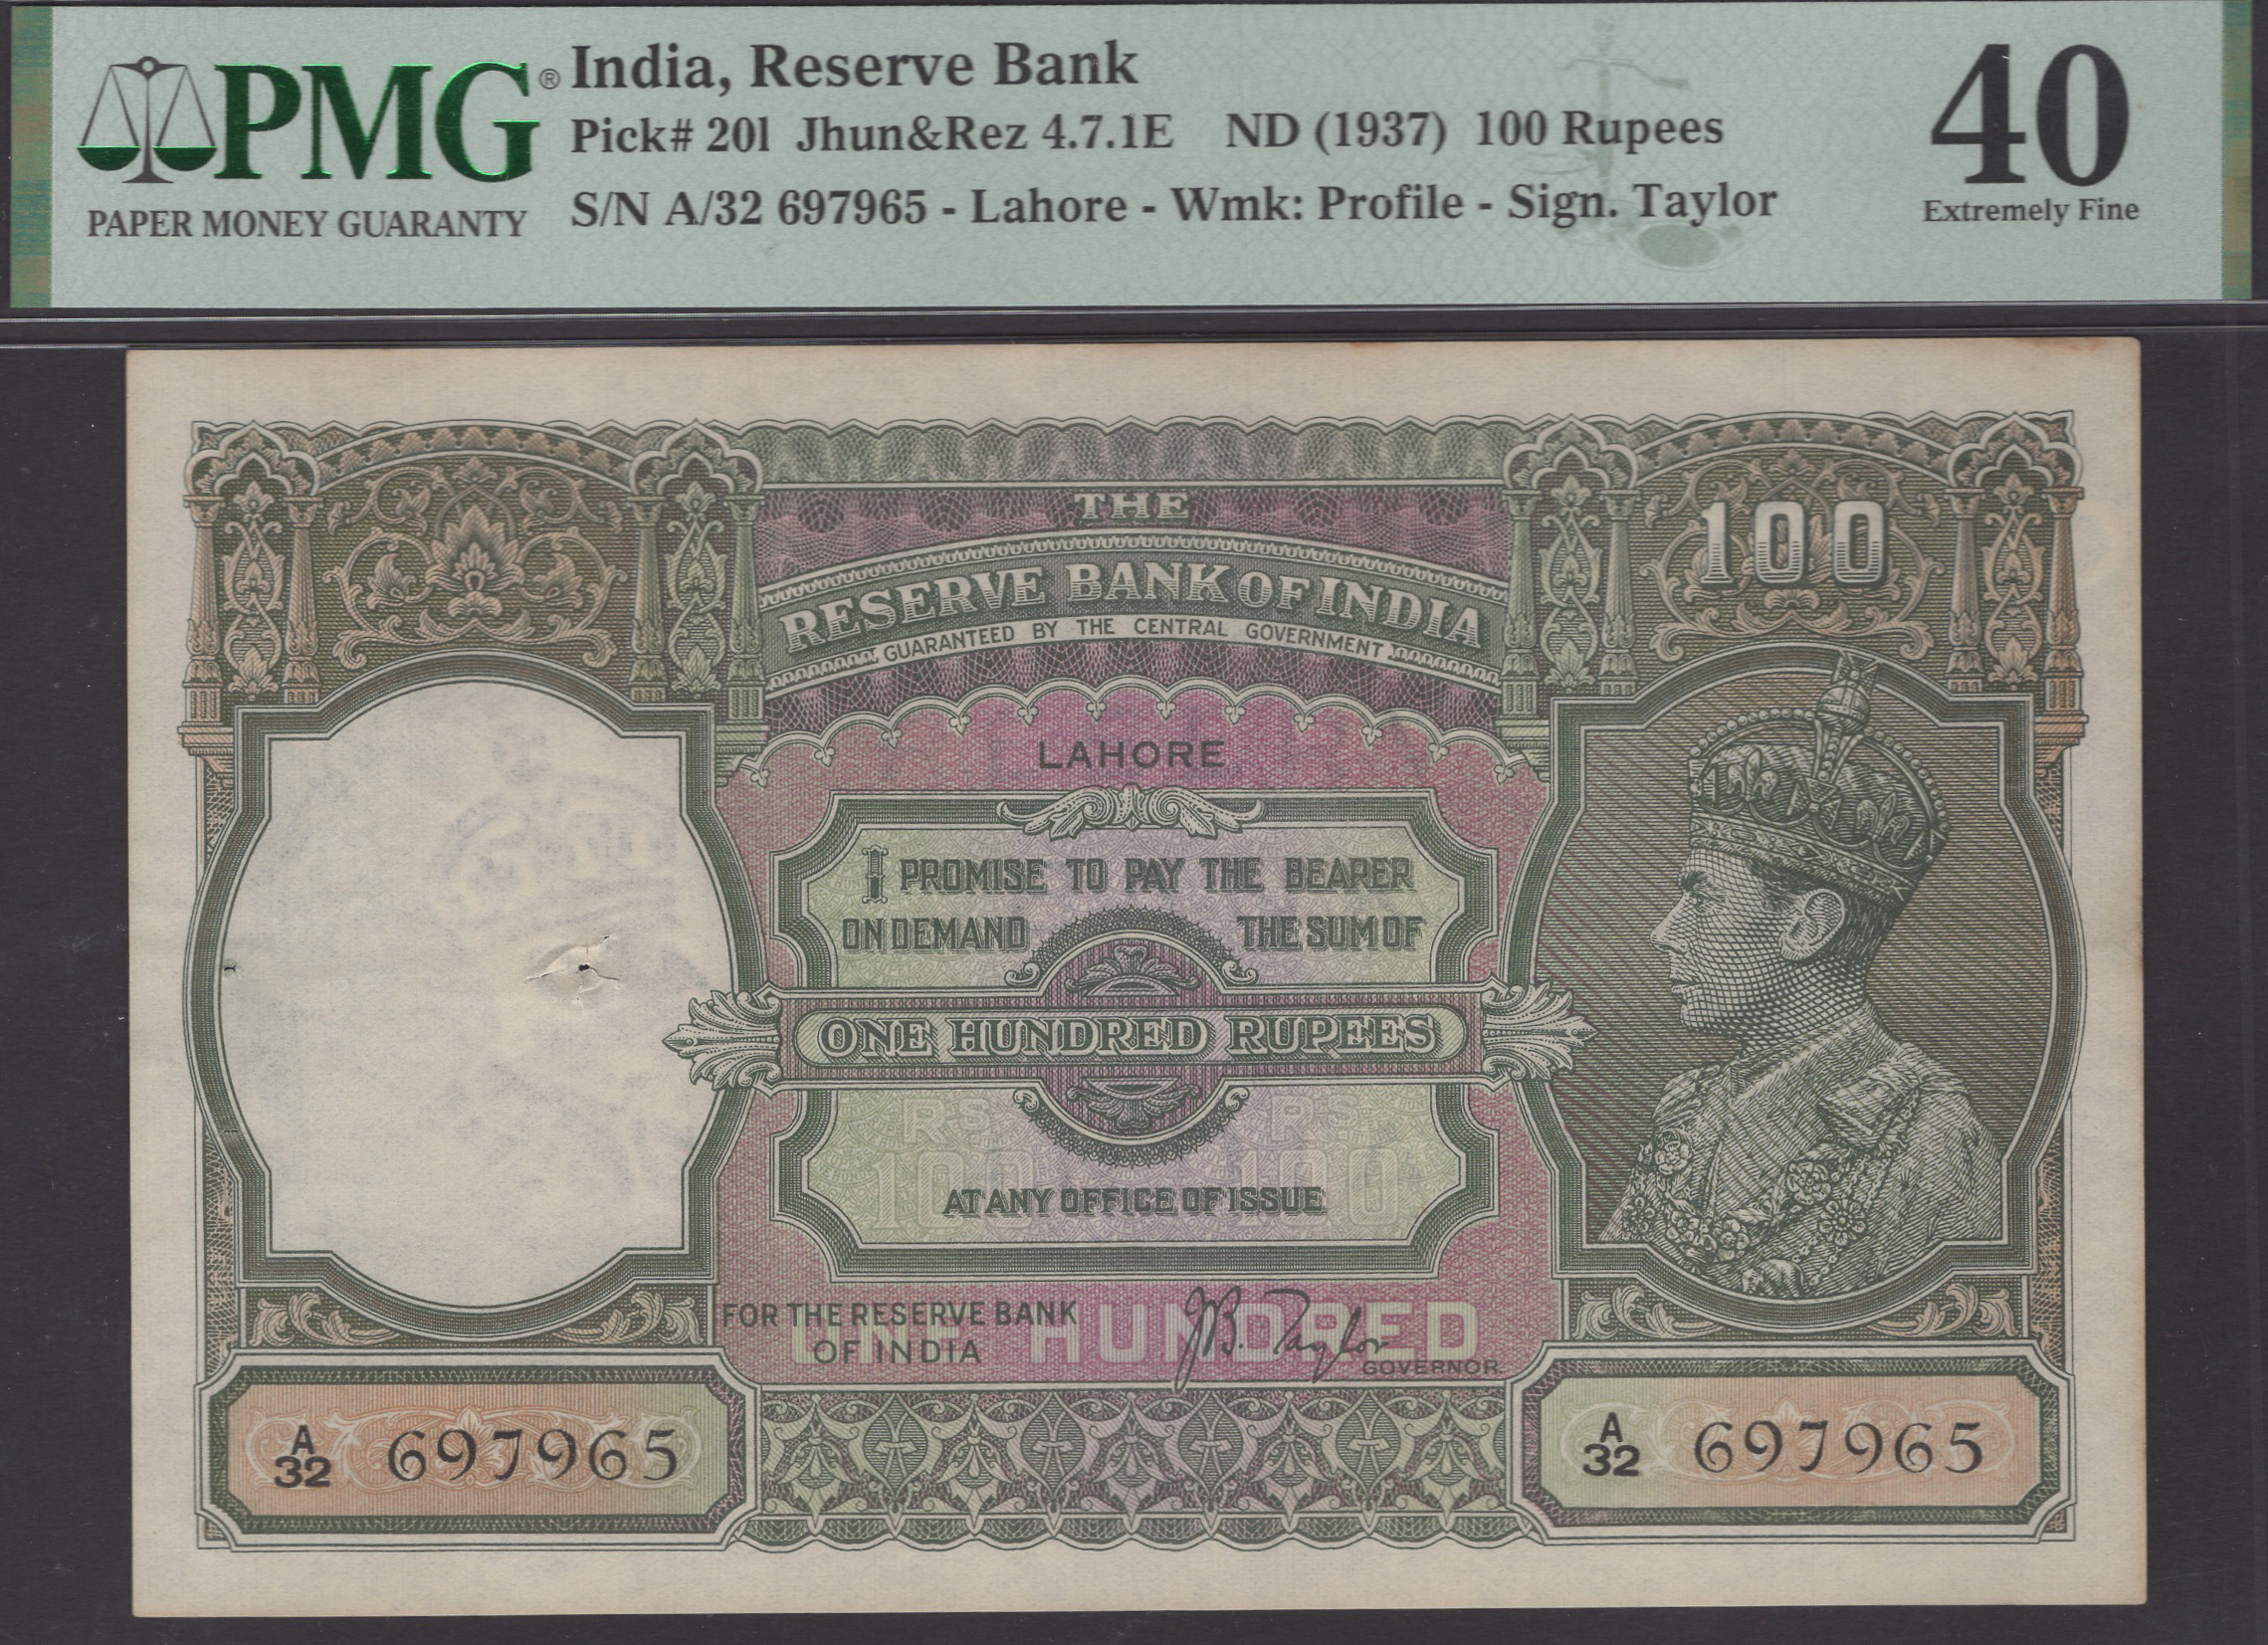 Reserve Bank of India, 100 Rupees, Lahore, ND (1937), serial number A/32 697965, Taylor...